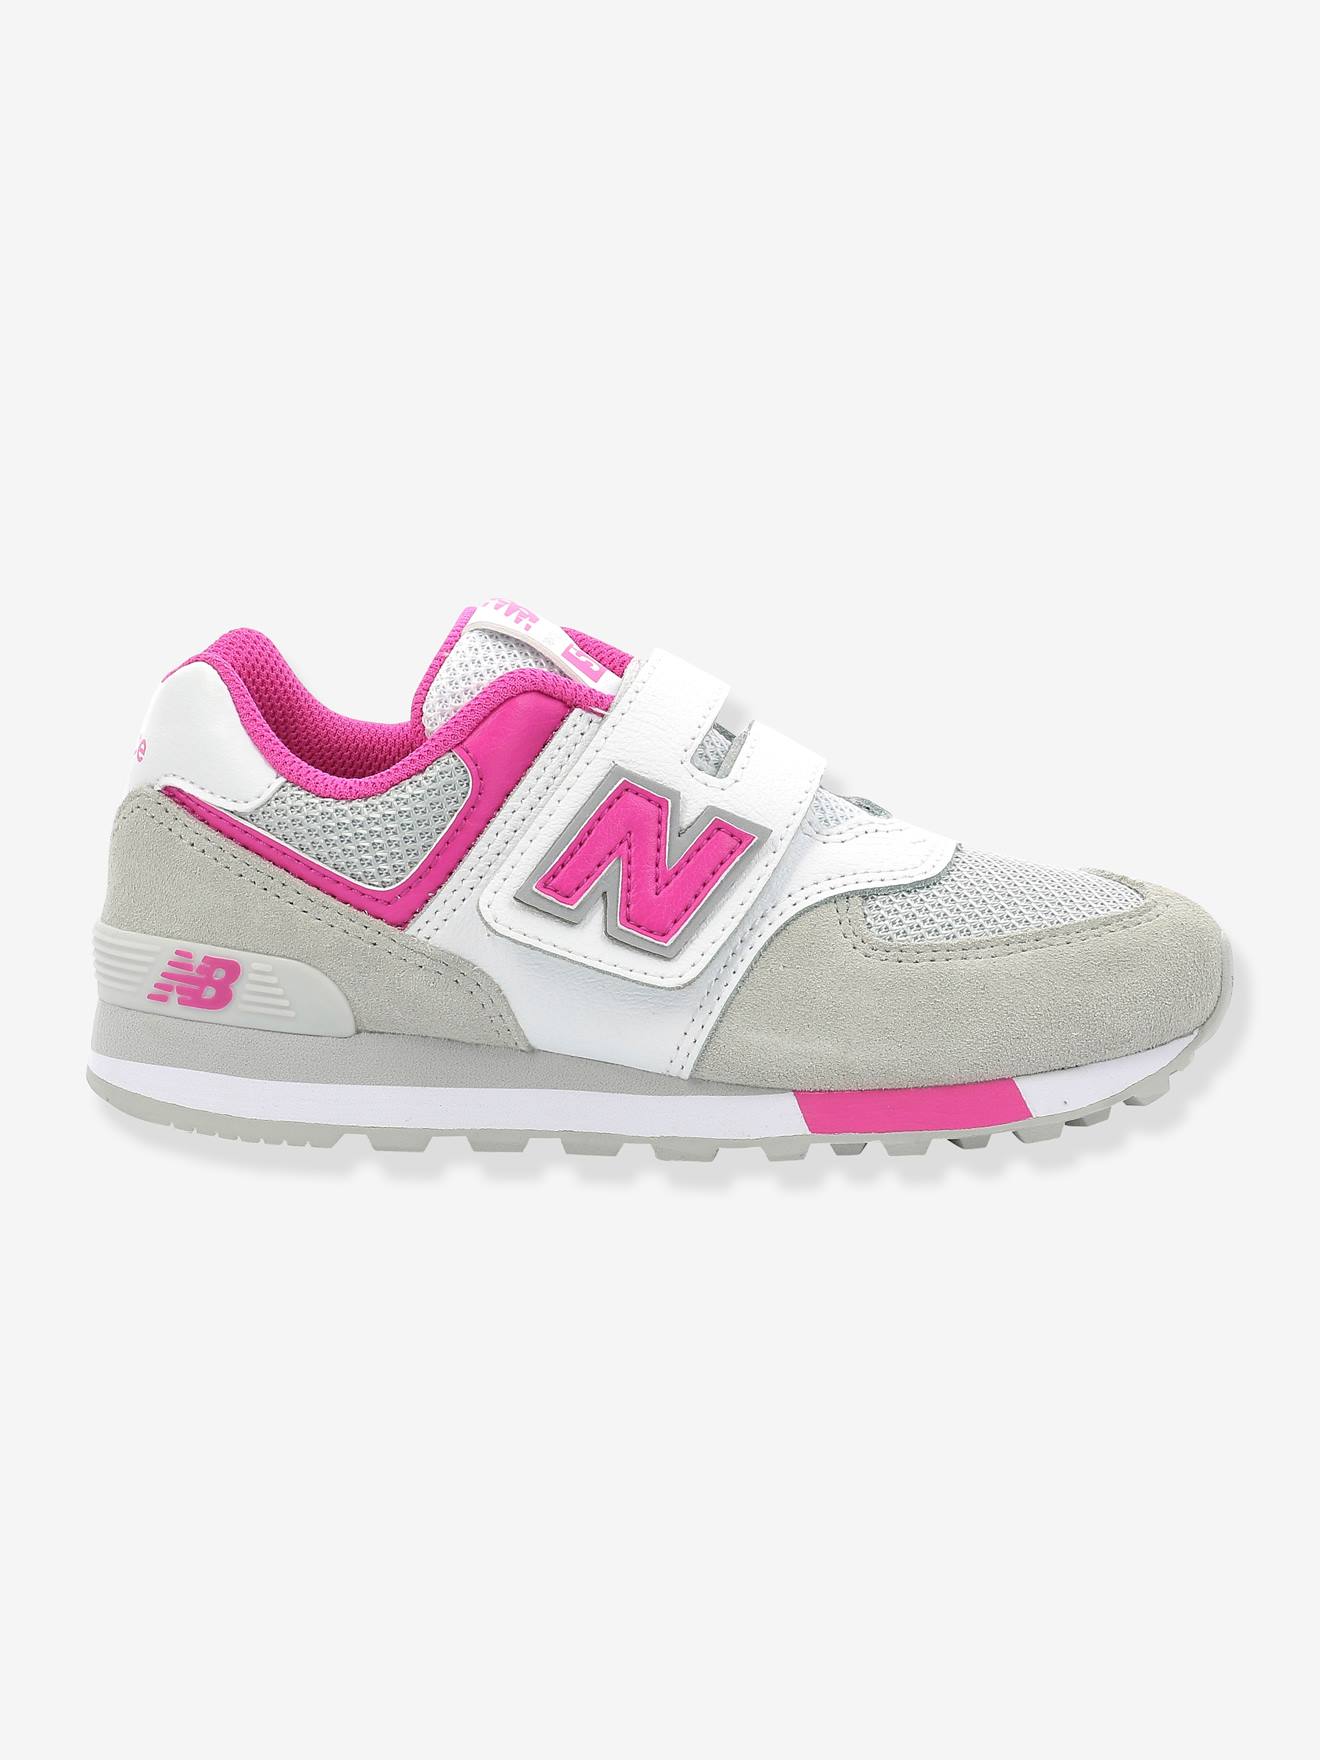 new balance fille 24 Cheaper Than Retail Price> Buy Clothing ...